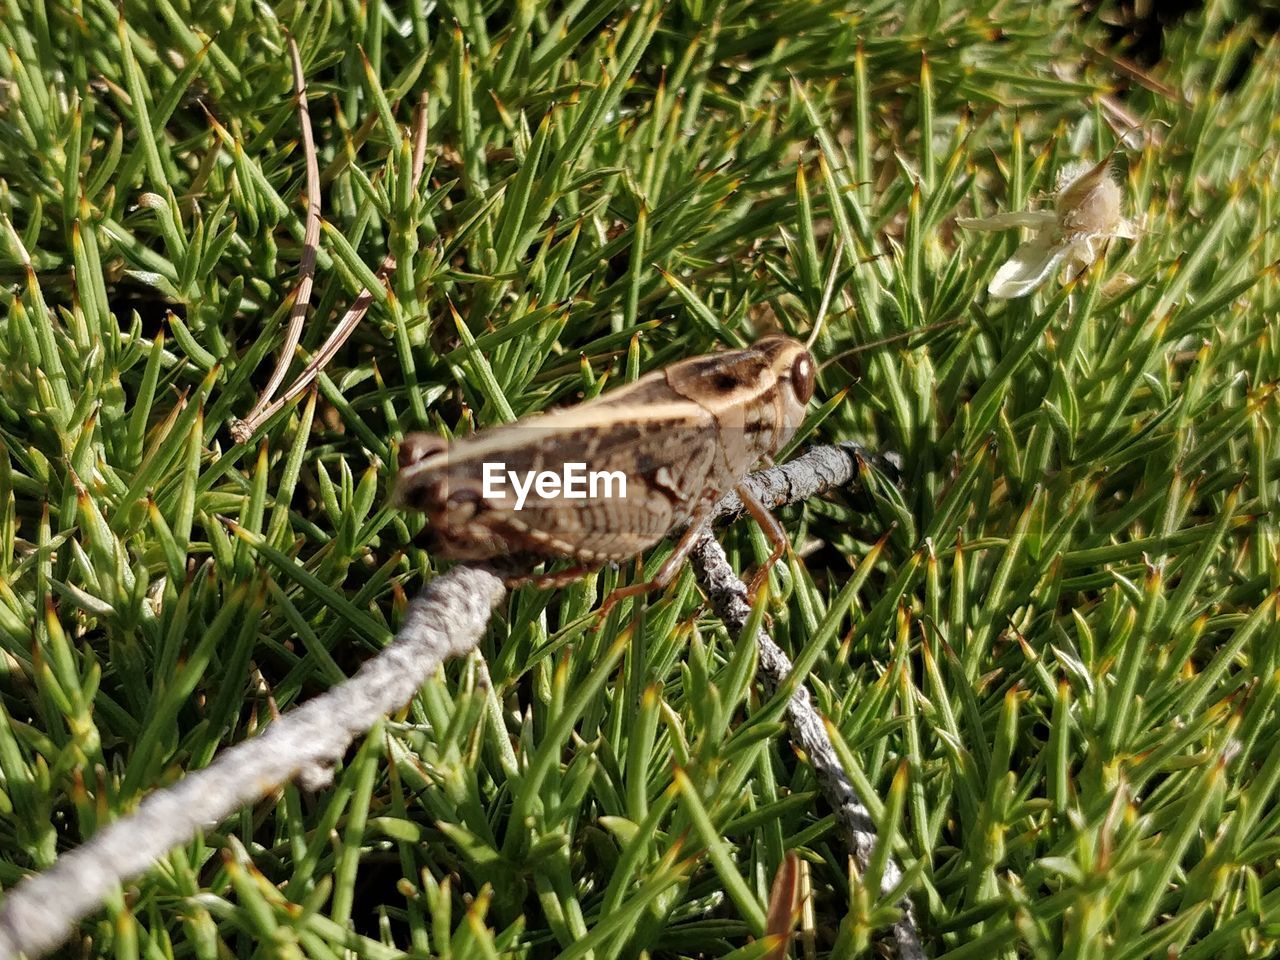 CLOSE-UP OF A LIZARD ON FIELD